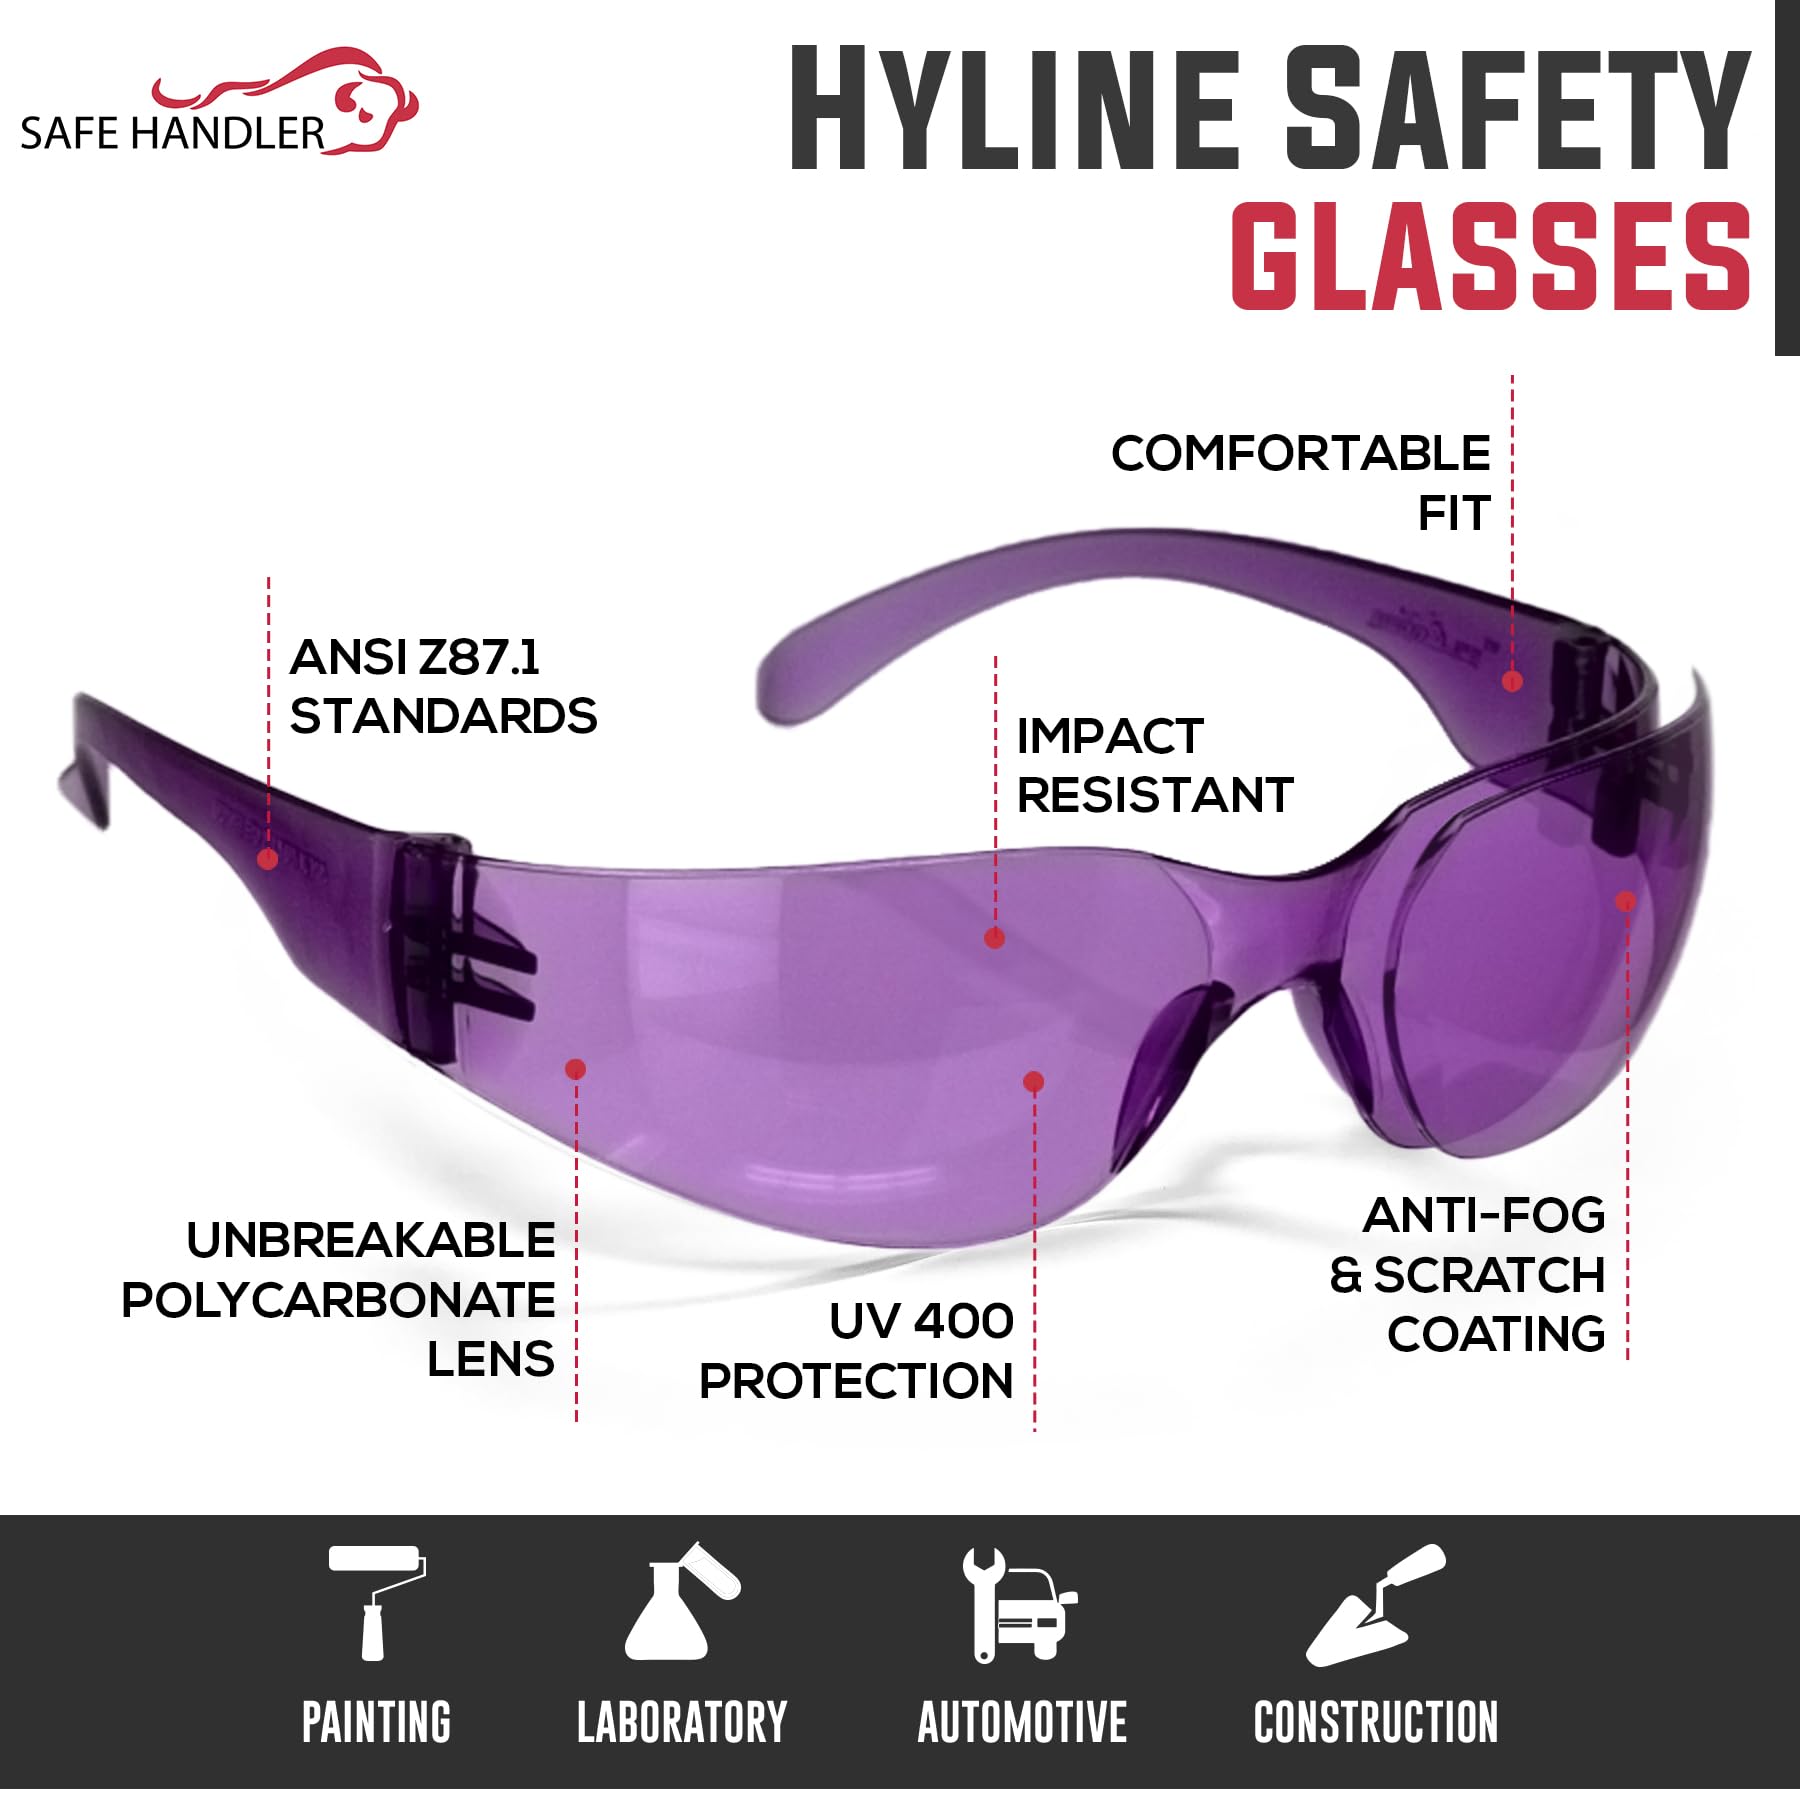 SAFE HANDLER BISON LIFE Hyline Safety Glasses | FULL COLOR, ANSI Z87.1, Impact Resistant, Unbreakable Lens, 99% UV Protection, Anti-Scratch & Anti-Fog, 12 PAIRS 12 Assorted Colors (1 box)